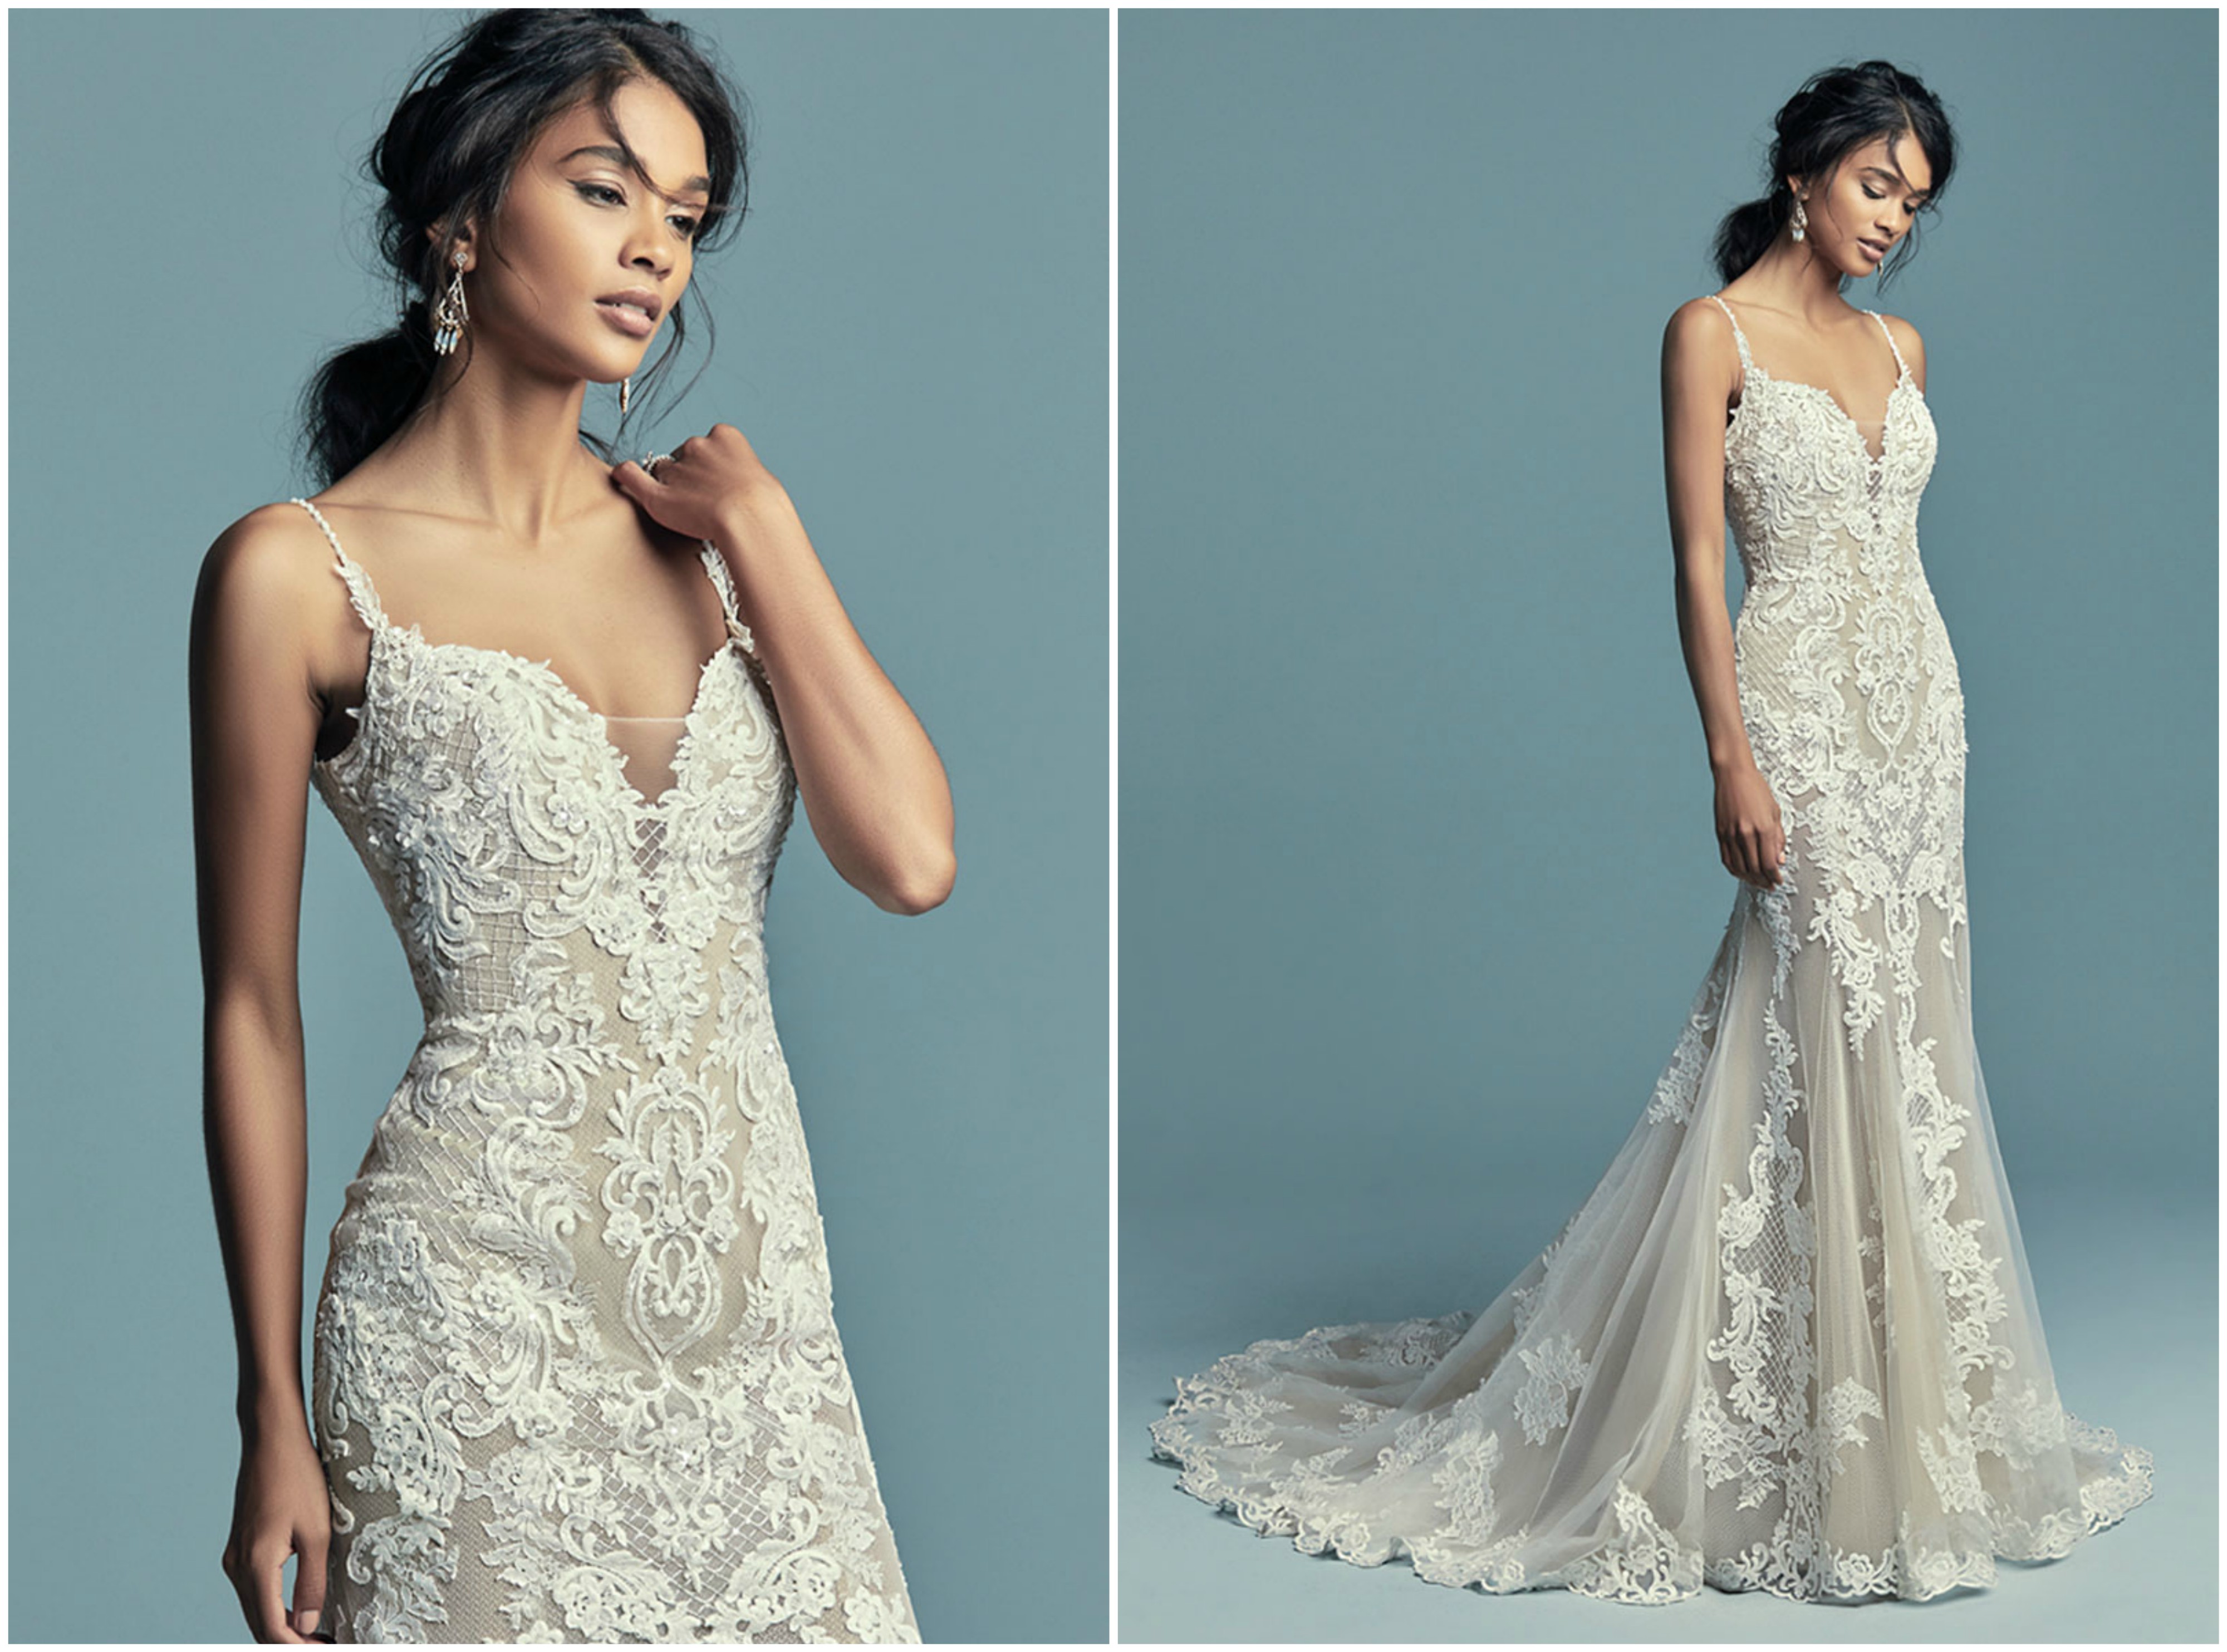 <a href="https://www.maggiesottero.com/maggie-sottero/abbie-marie/11452" target="_blank">Maggie Sottero</a>